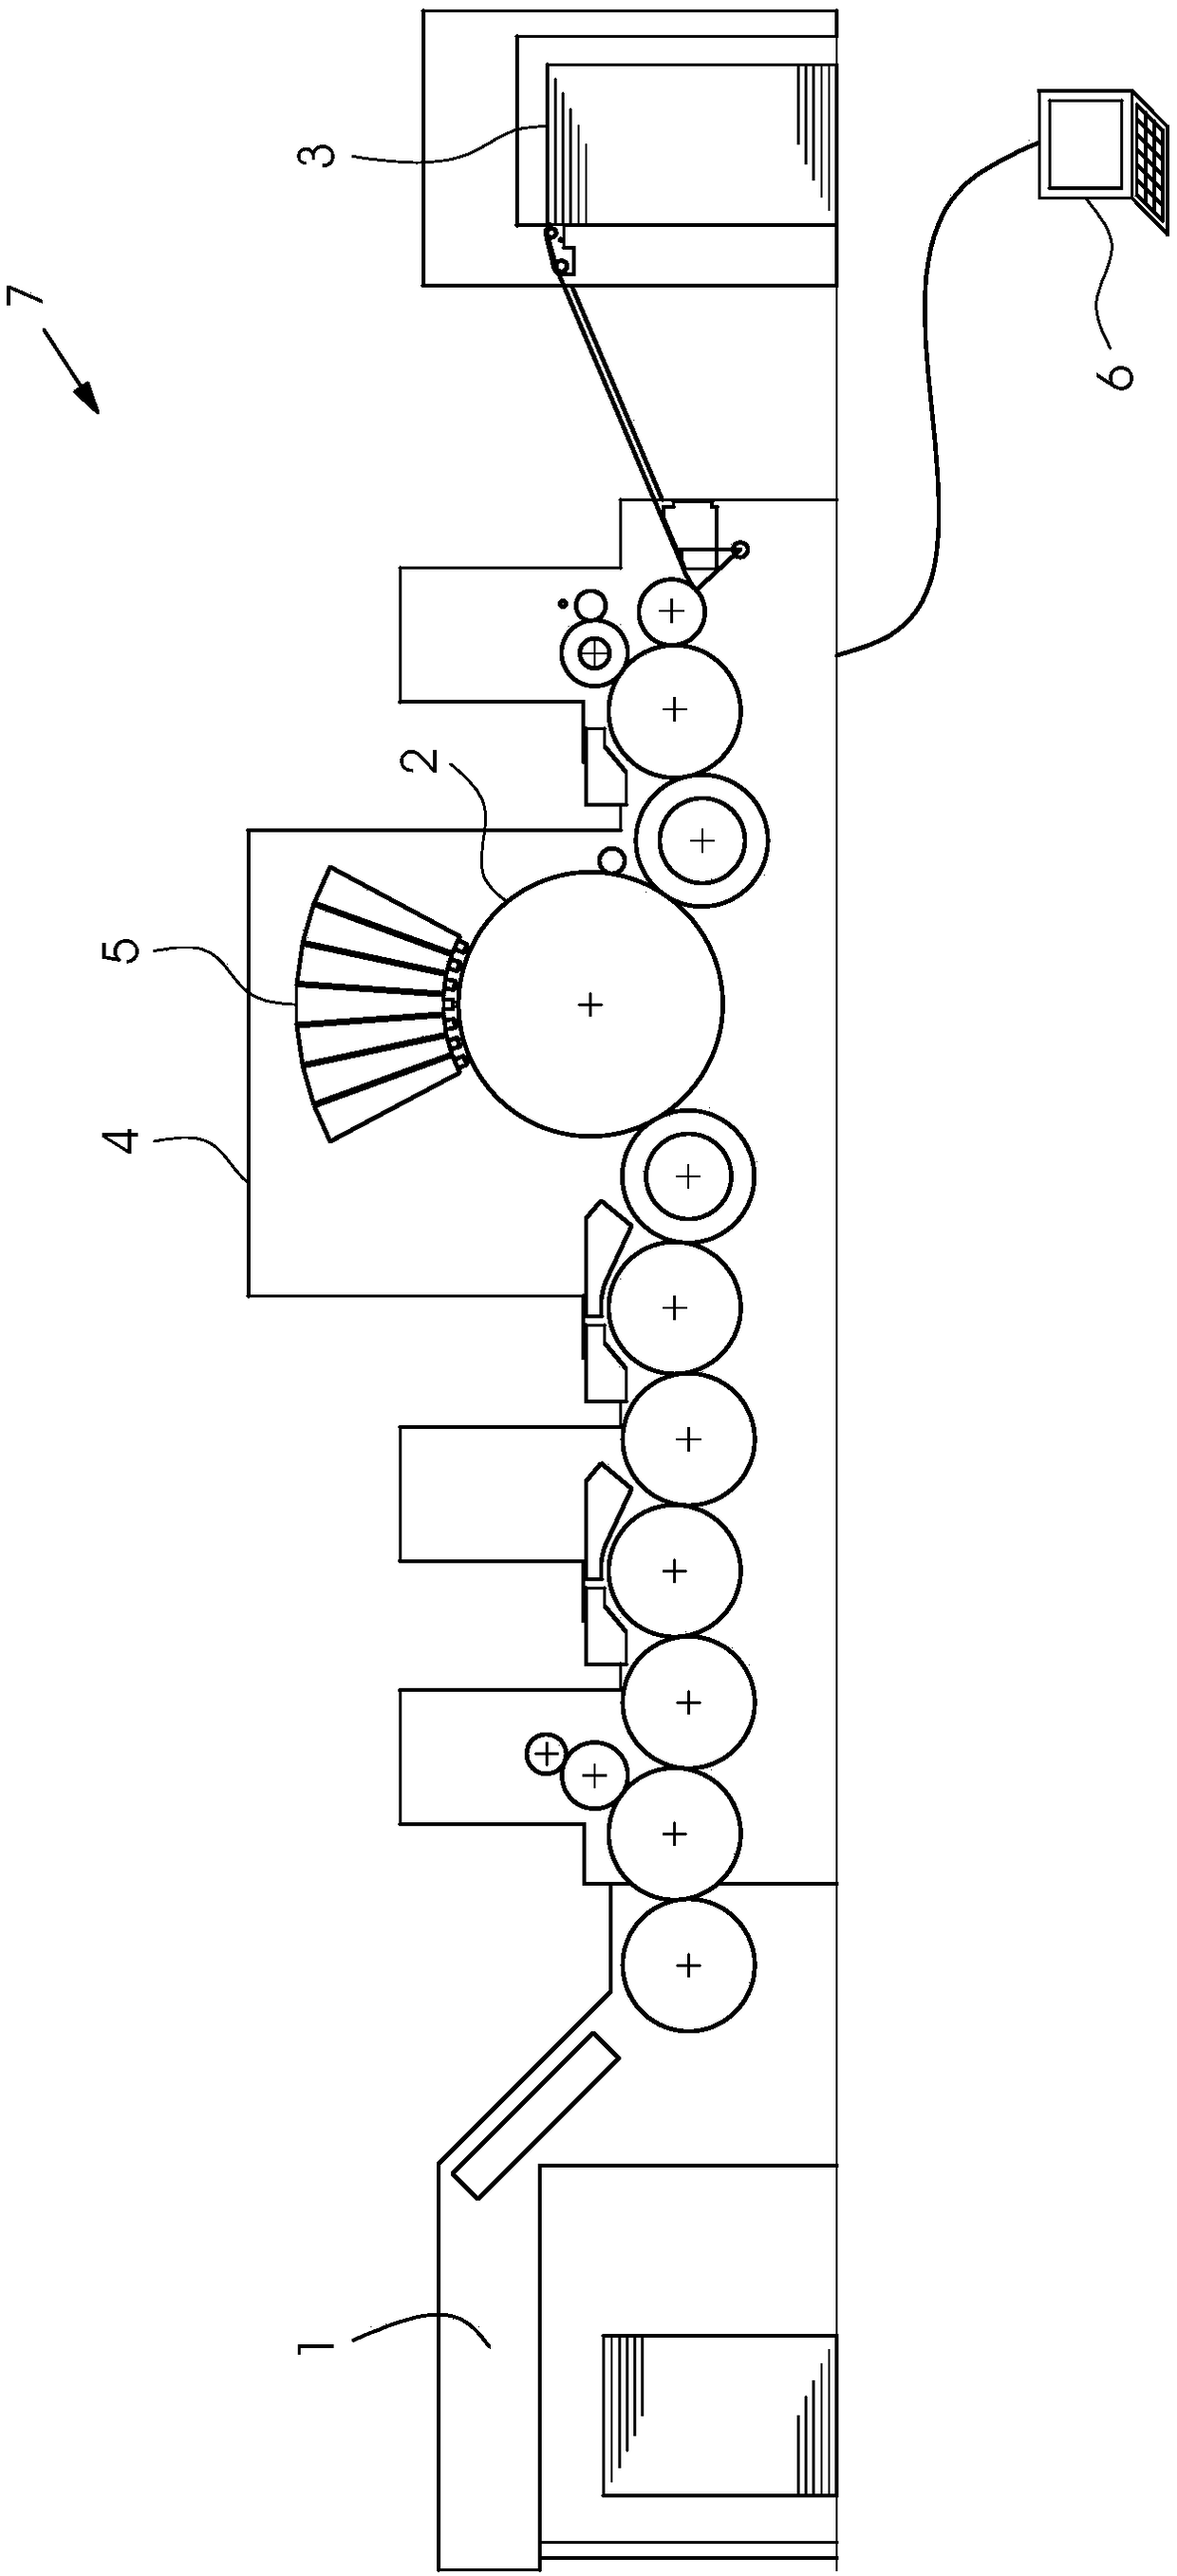 Method for carrying out printing operation on inkjet printing machine